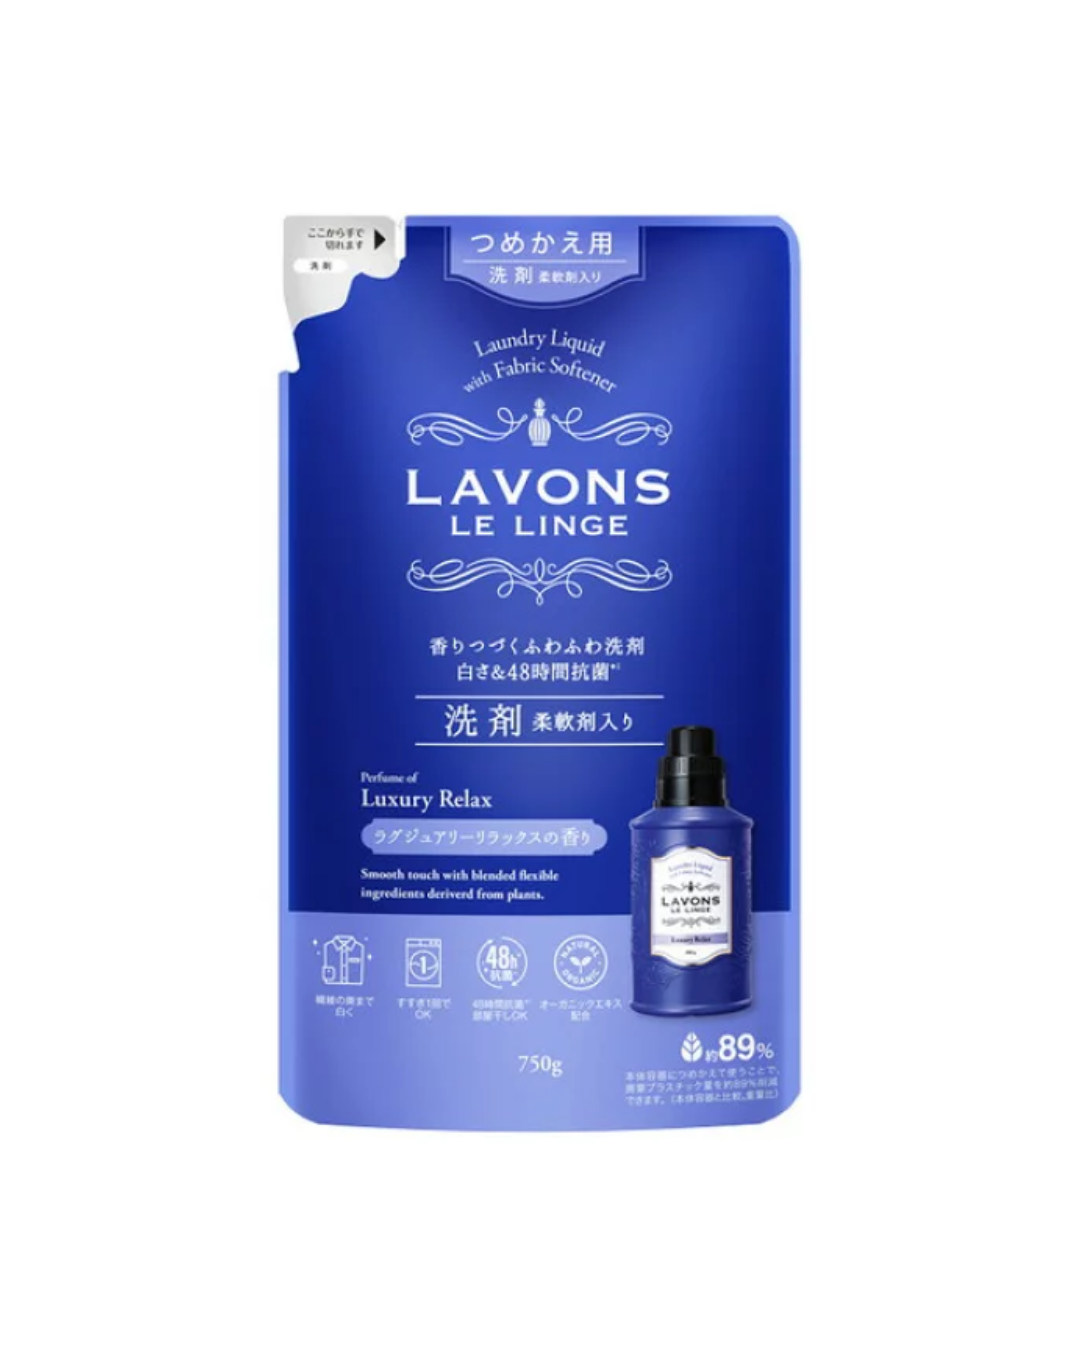 Lavons Laundry Liquid with Fabric Softener | Refill Luxury Relax